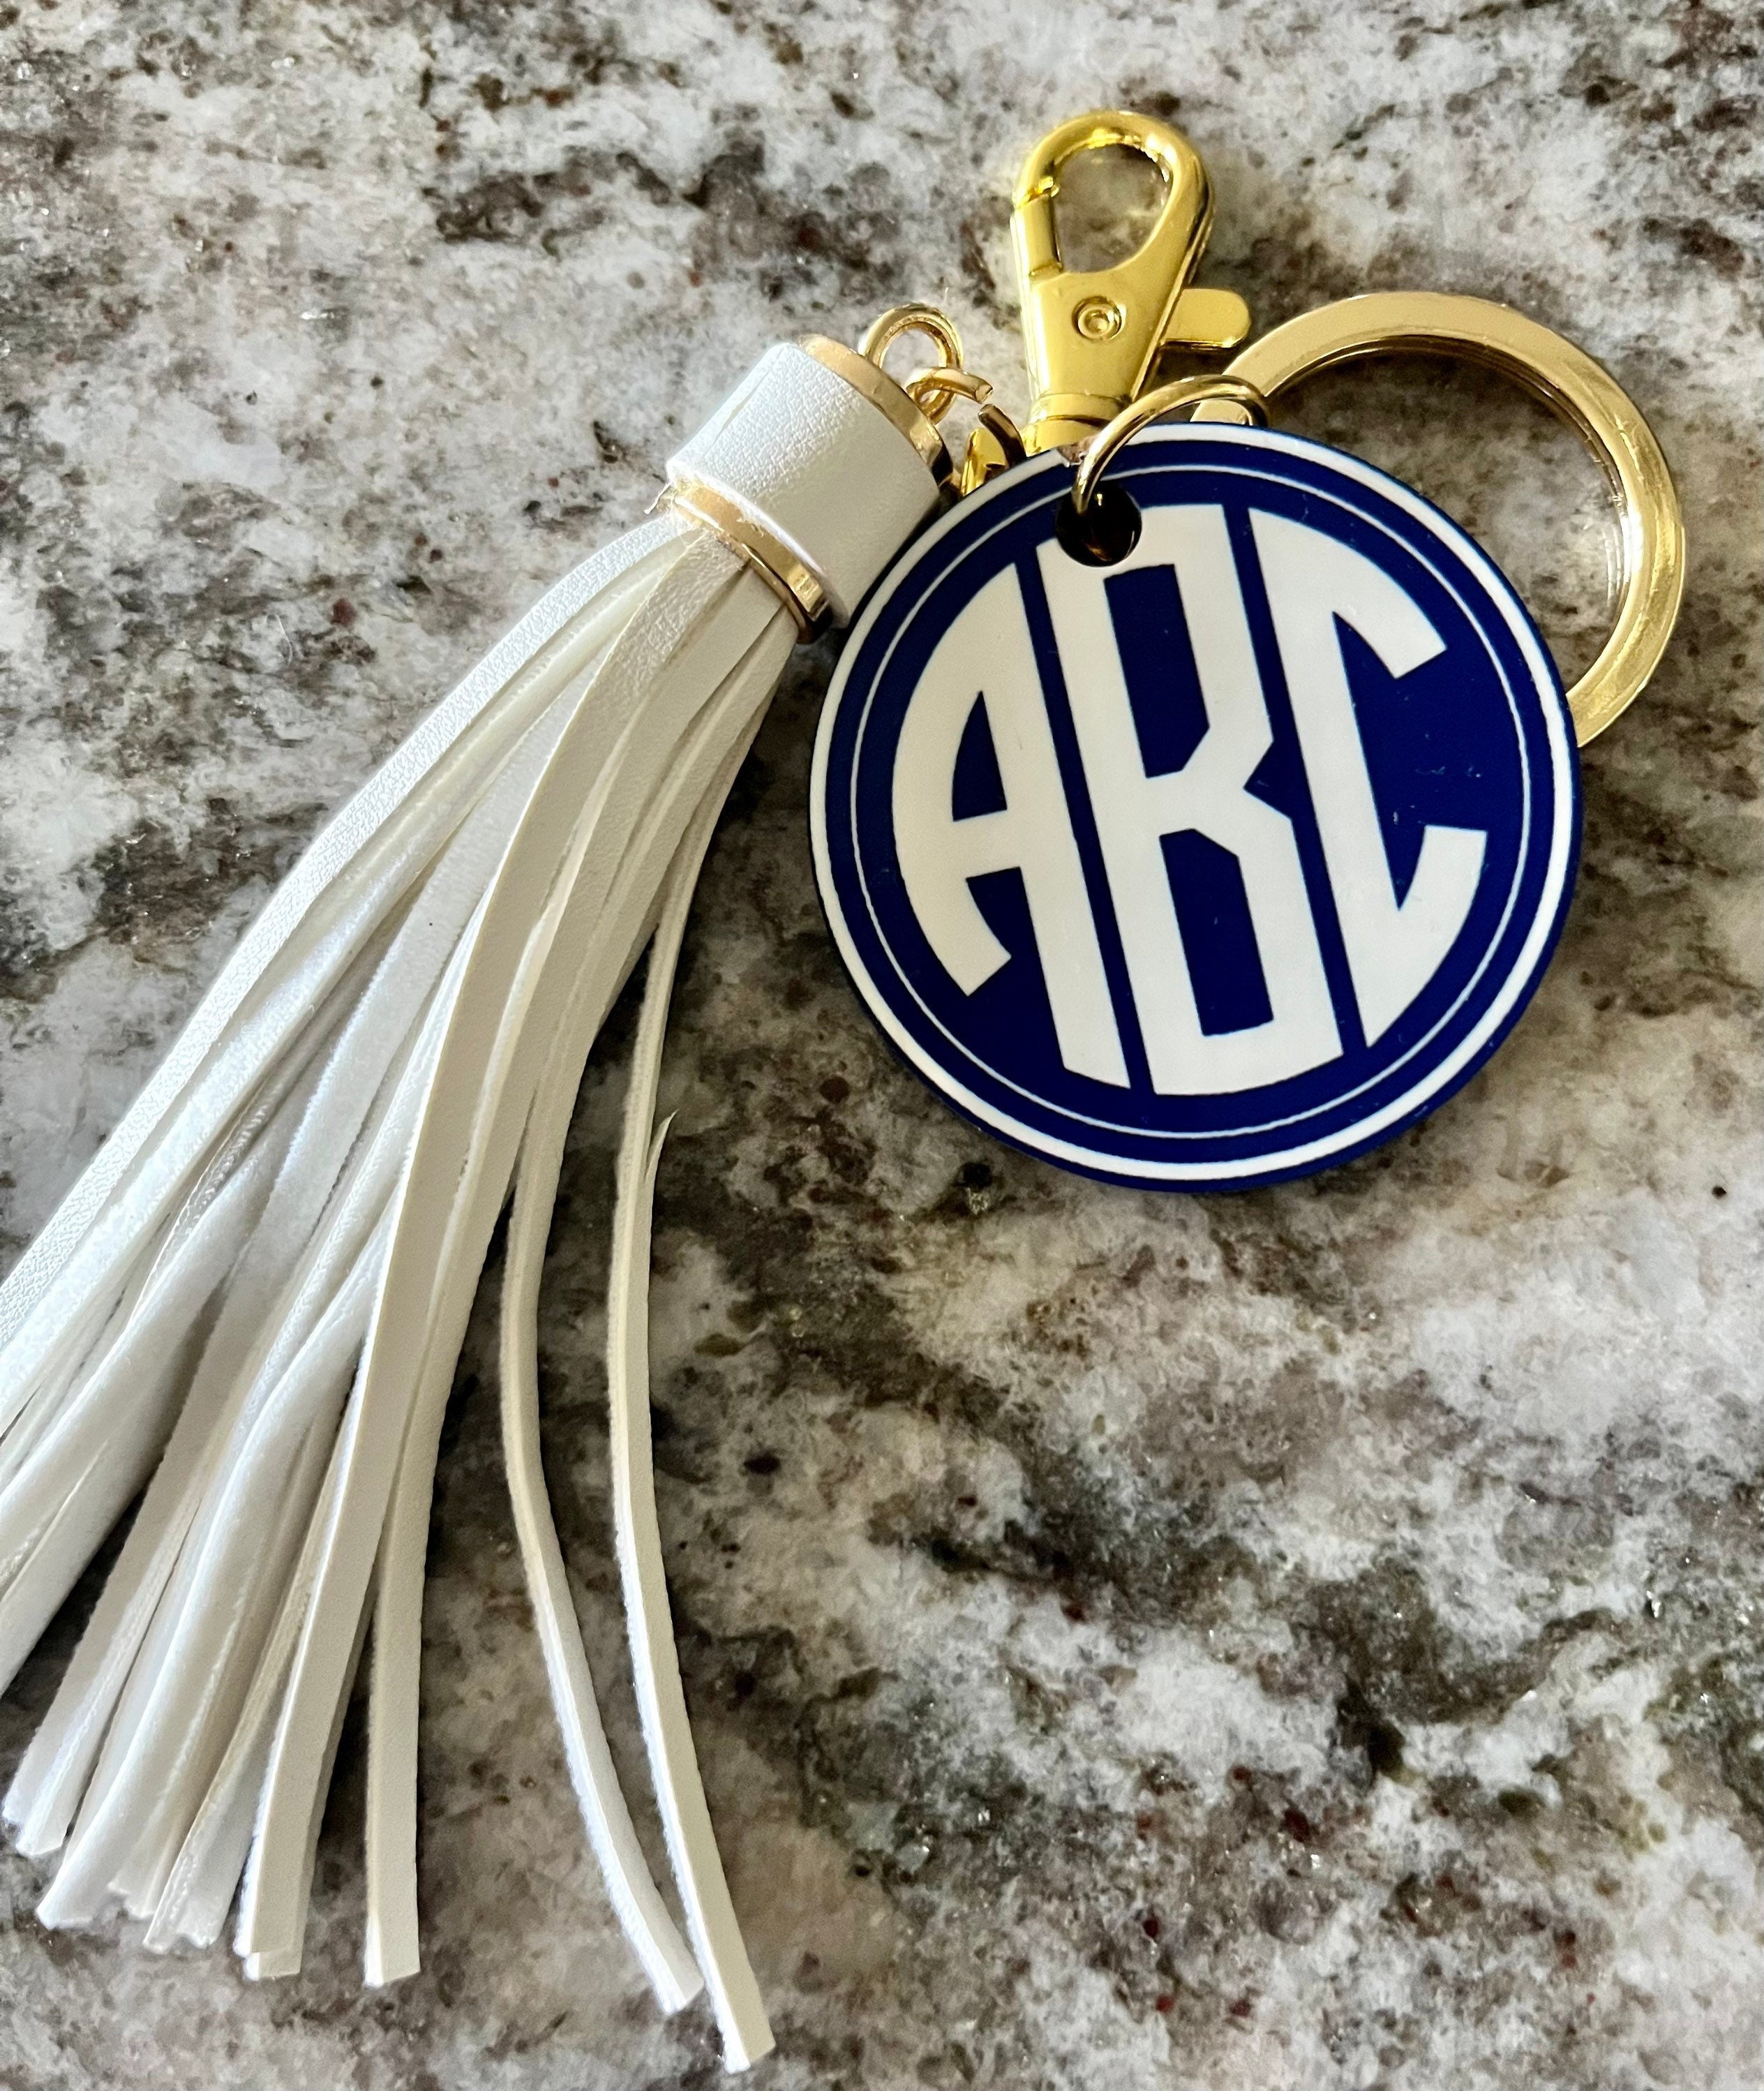 Monogram Keychains for Women Gold Keychain Personalized Keychain Tassel  Keychain Custom Keychain Gifts for Bridesmaid Keychain (EB3140)